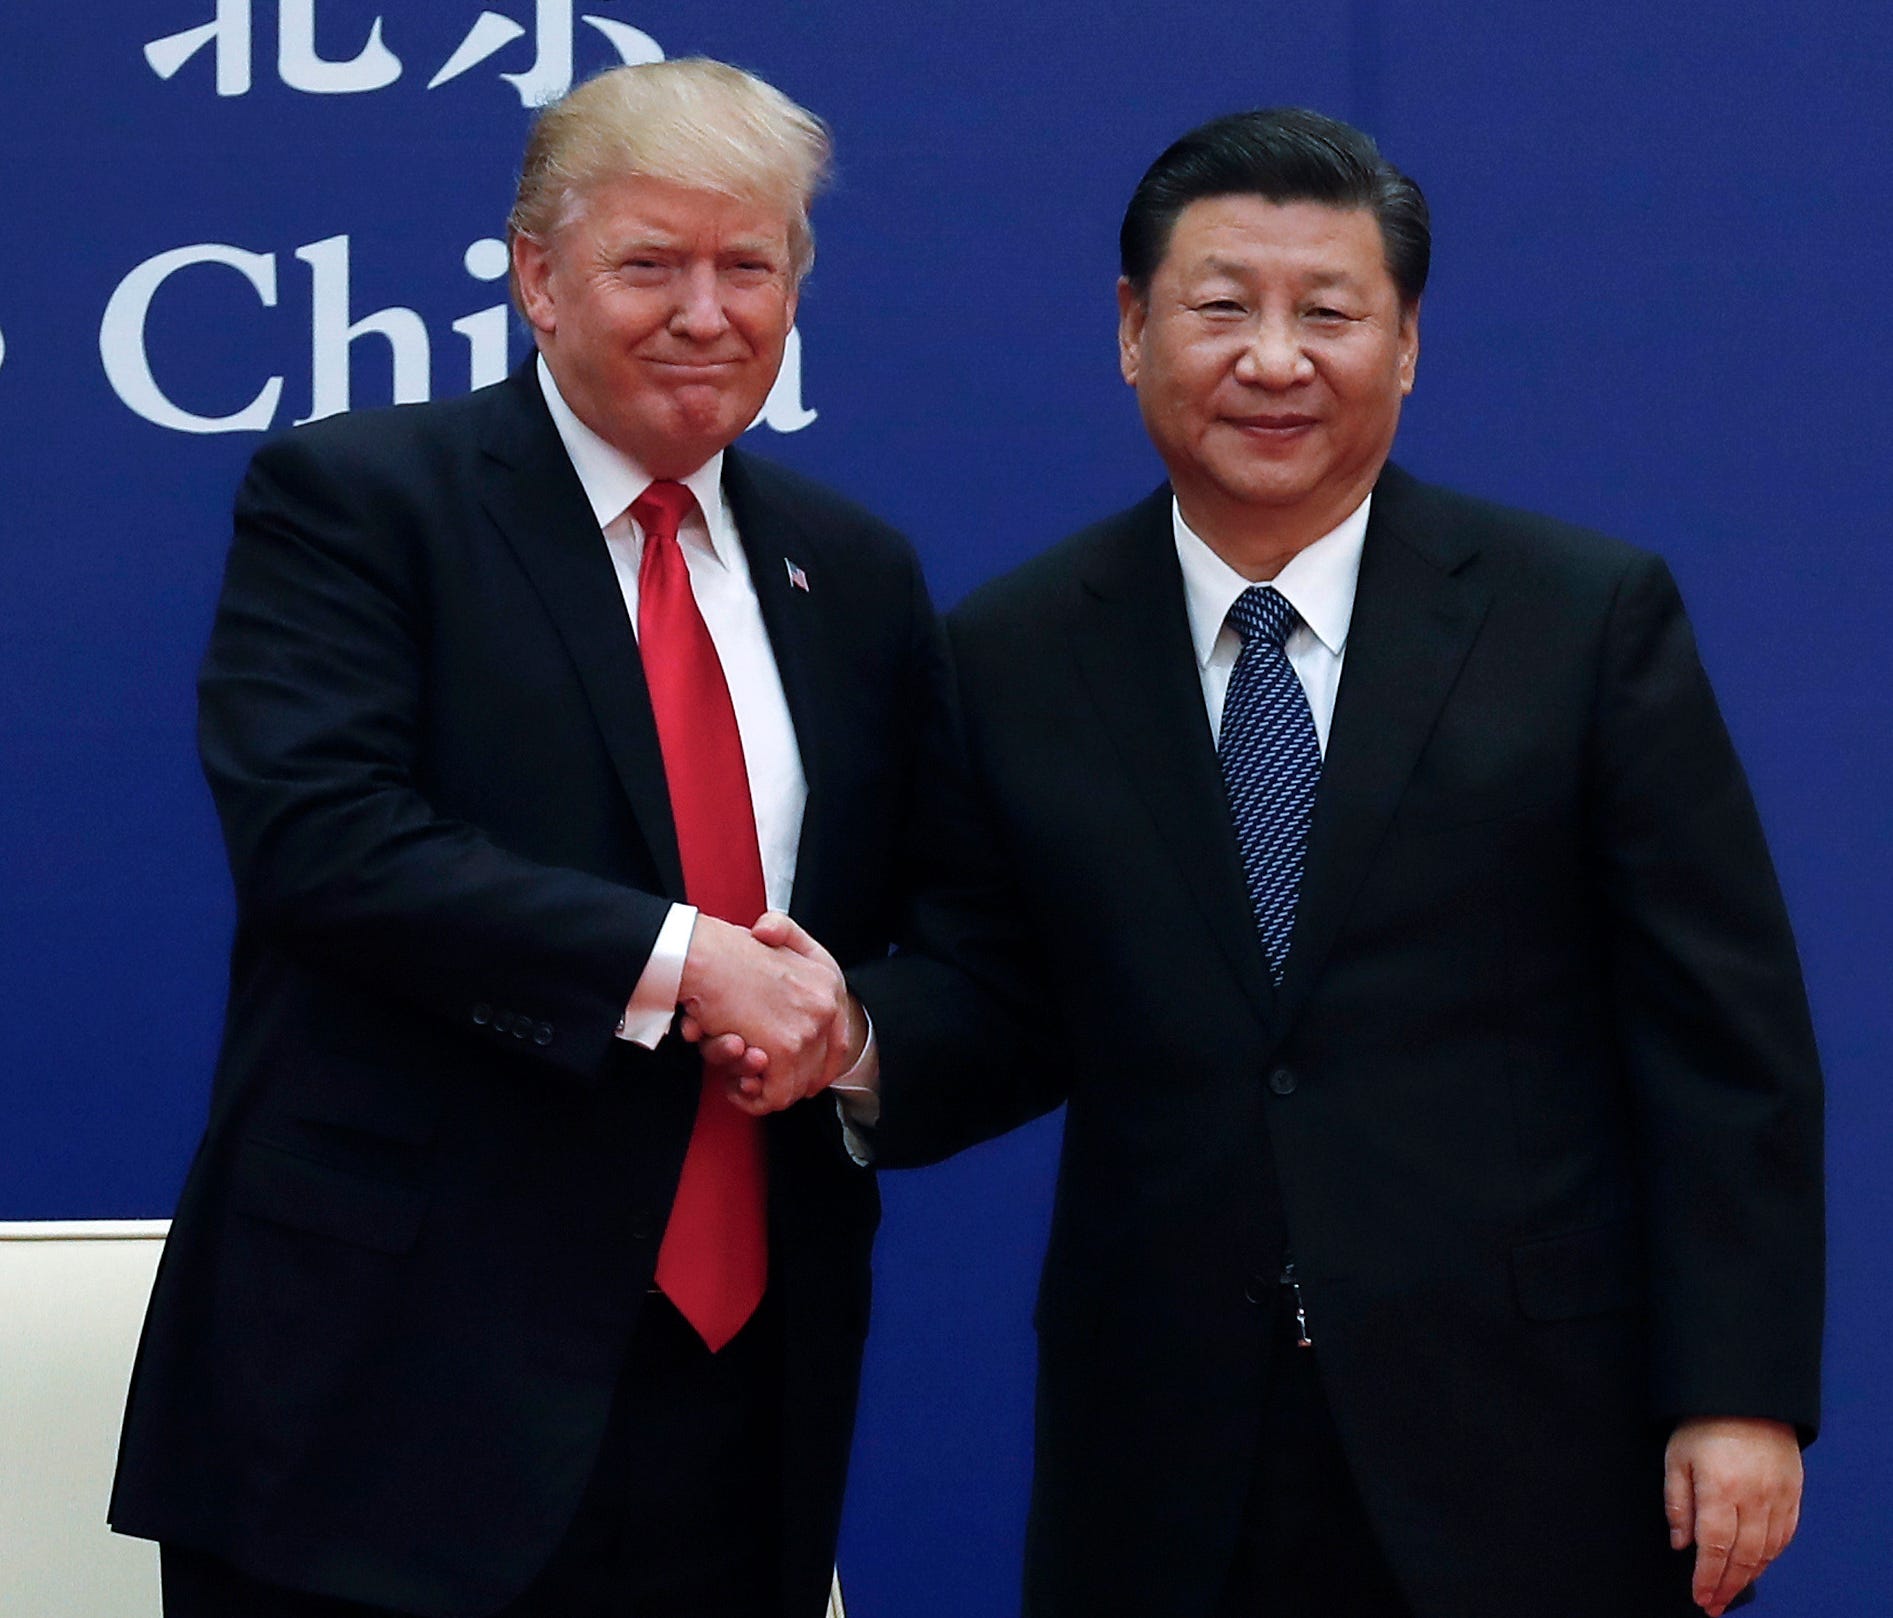 U.S. President Donald Trump, left, shakes hands with Chinese President Xi Jinping during a business event at the Great Hall of the People in Beijing on Nov. 9, 2017.